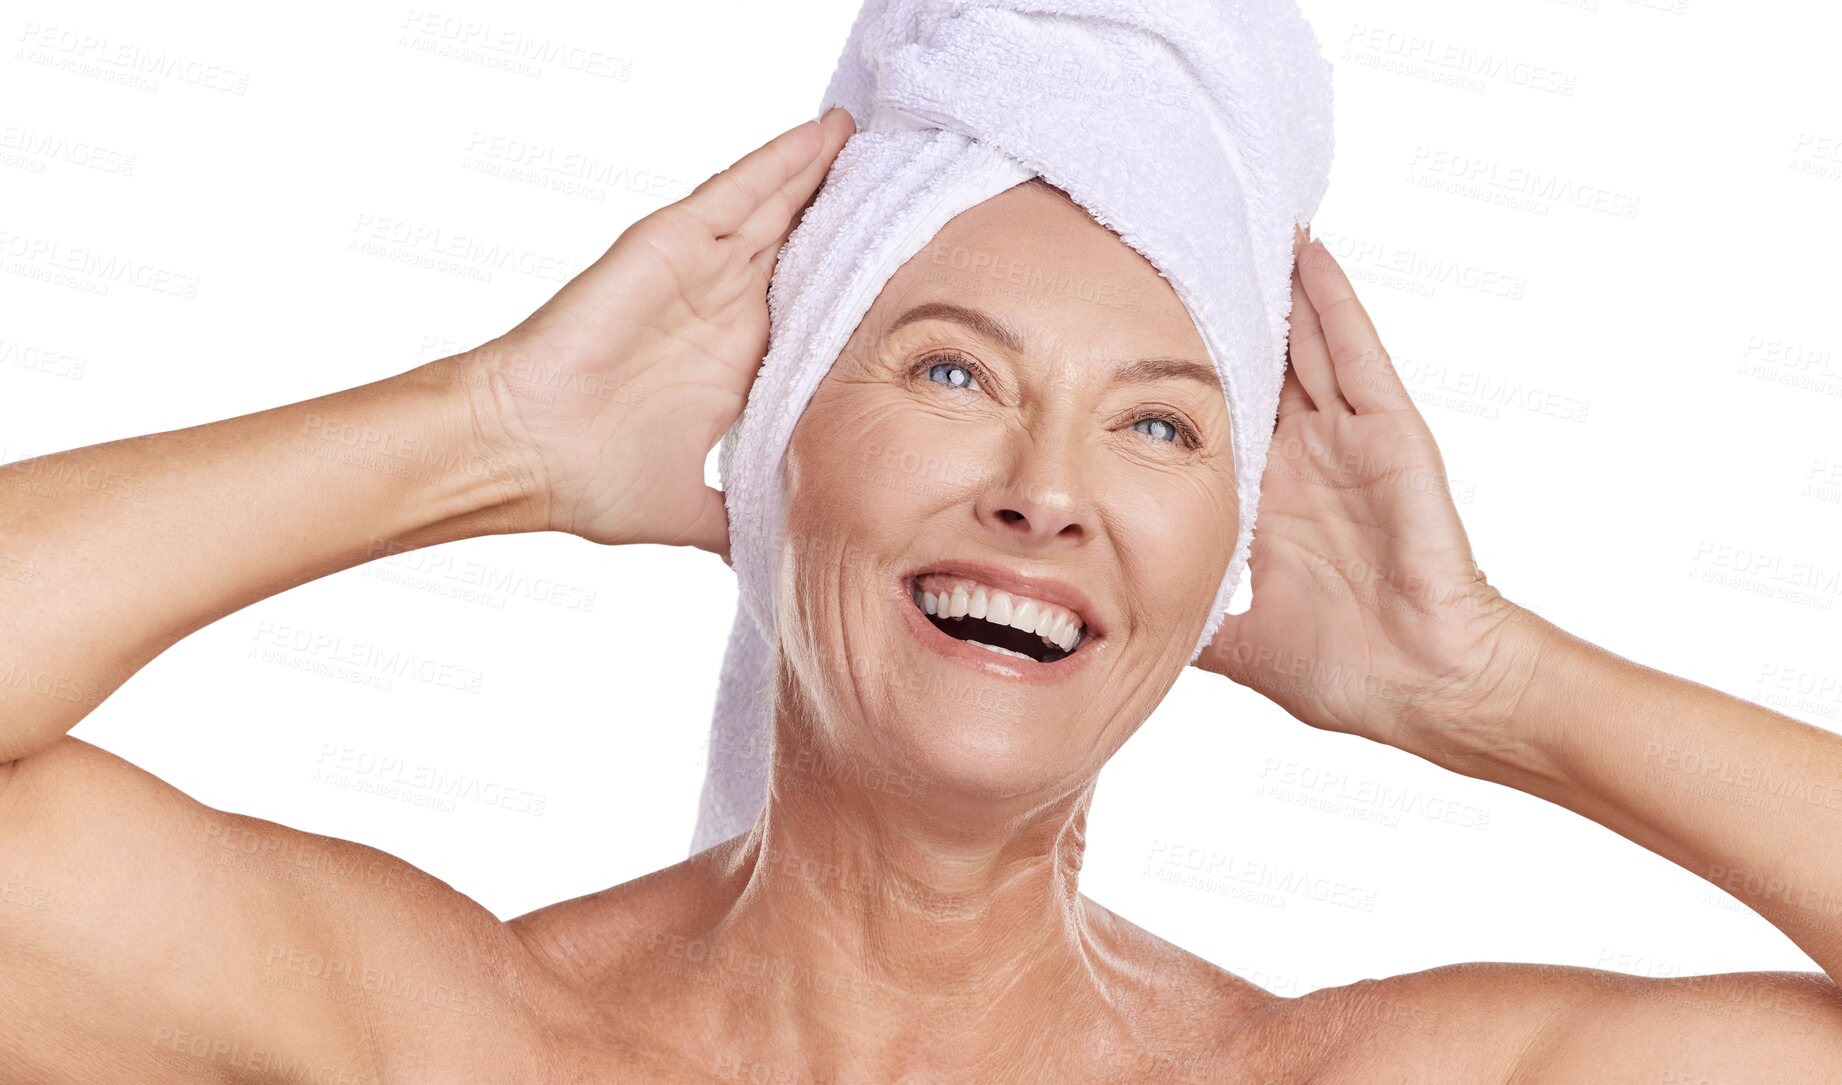 Buy stock photo Beauty, shower and face of old woman on transparent background for skincare, morning routine and spa. Happy, natural and health with person isolated on png for anti aging, cosmetics and facial 